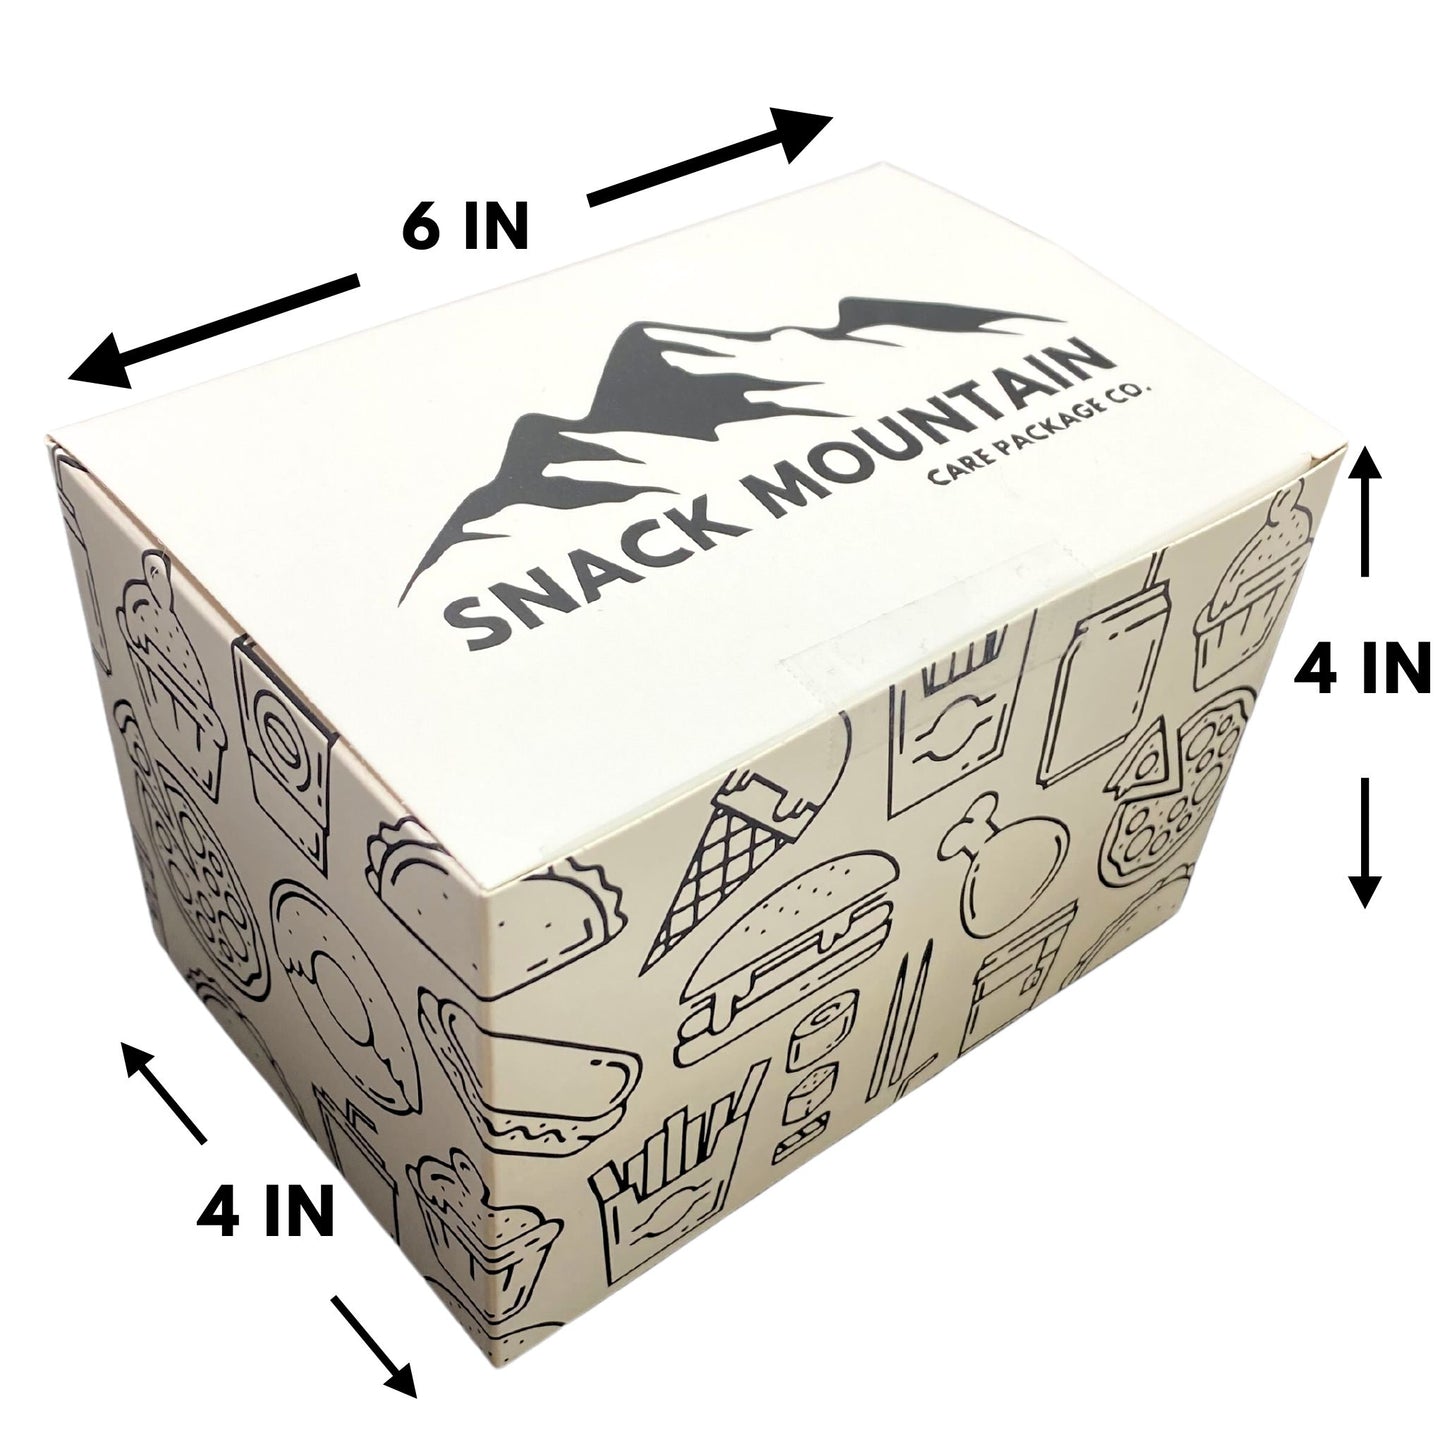 The dimensions of the candy snack box is 6x4x4".